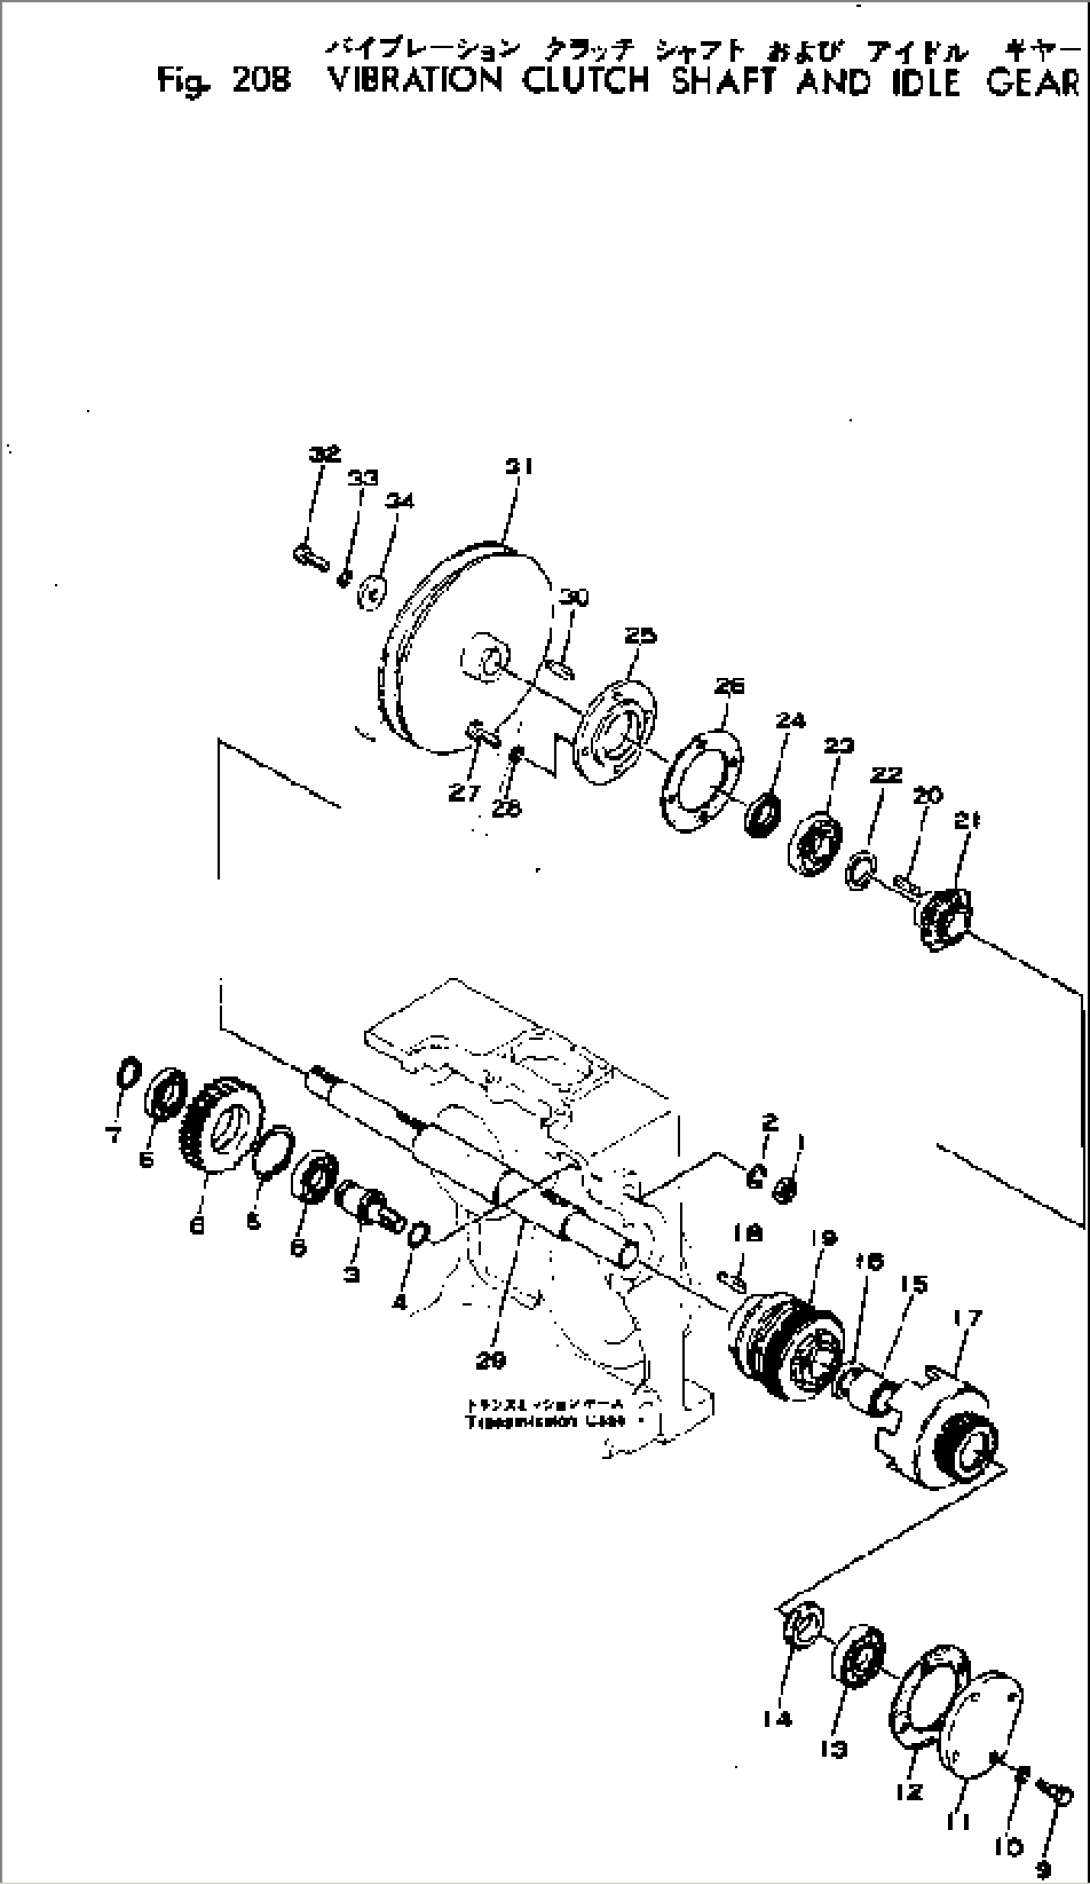 VIBRATION CLUTCH SHAFT AND IDLE GEAR